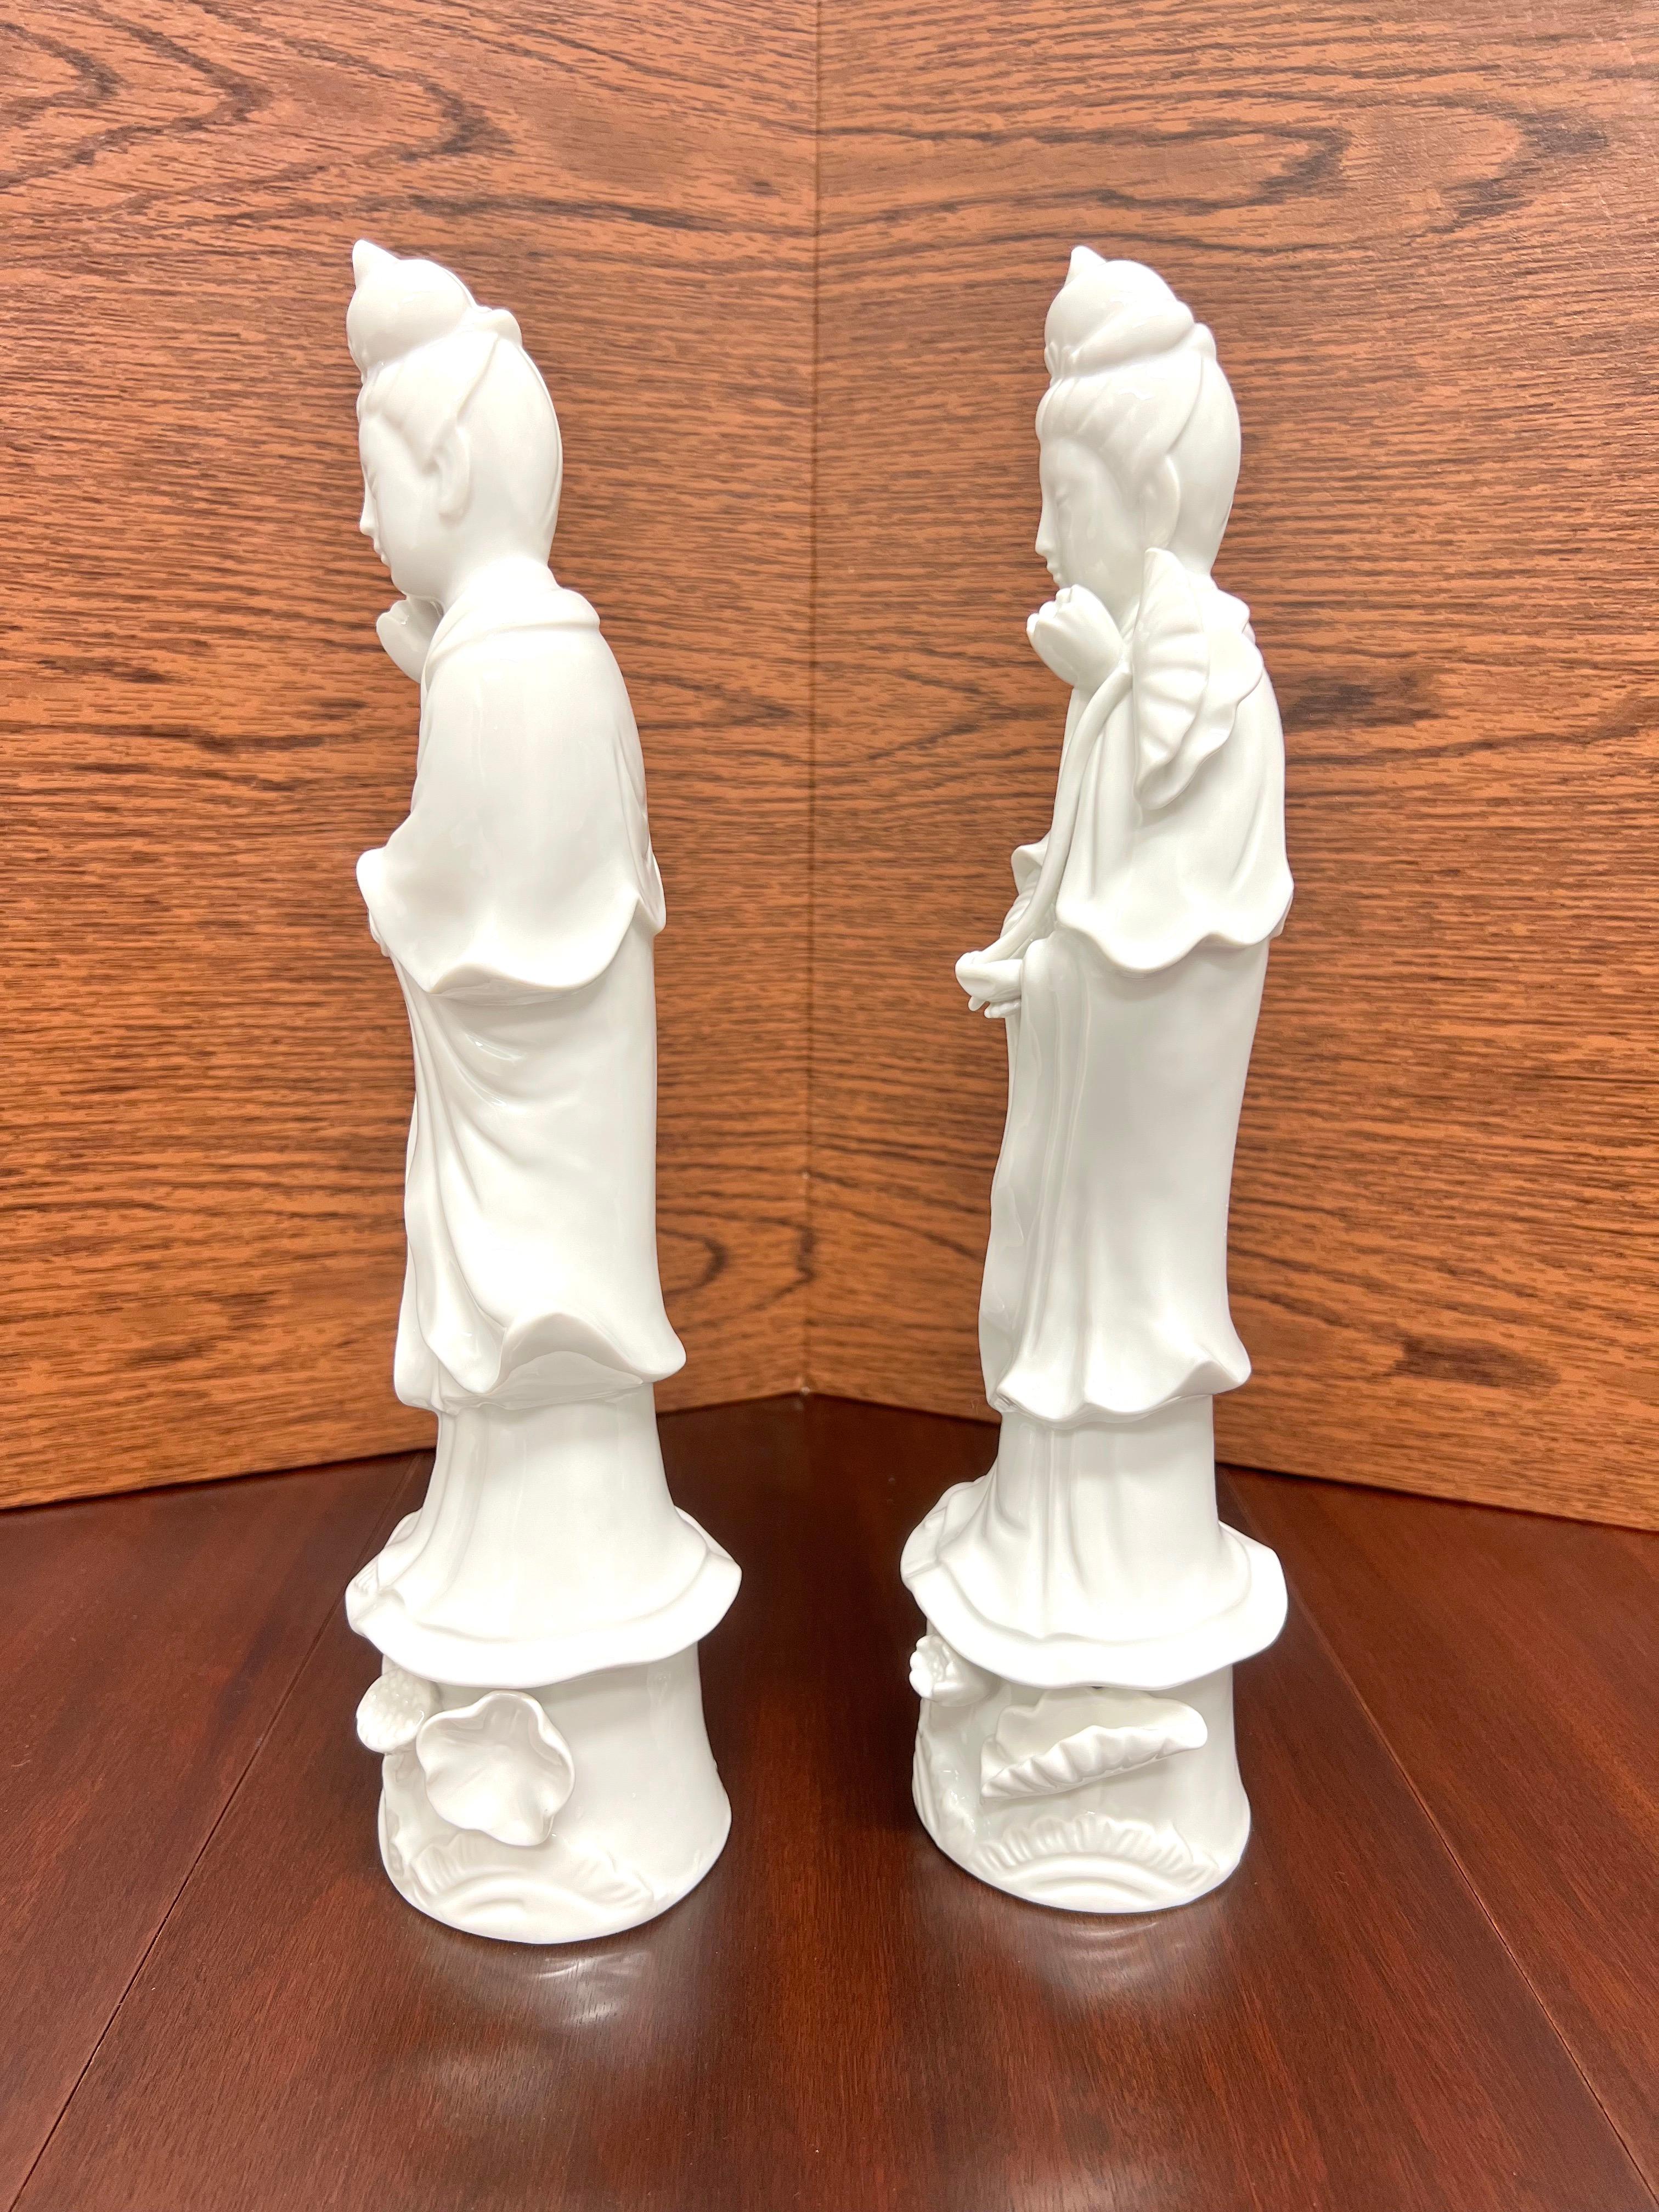 Chinoiserie ANDREA BY SADEK White Porcelain Quan Yin Goddess of Mercy Figurines - Pair For Sale